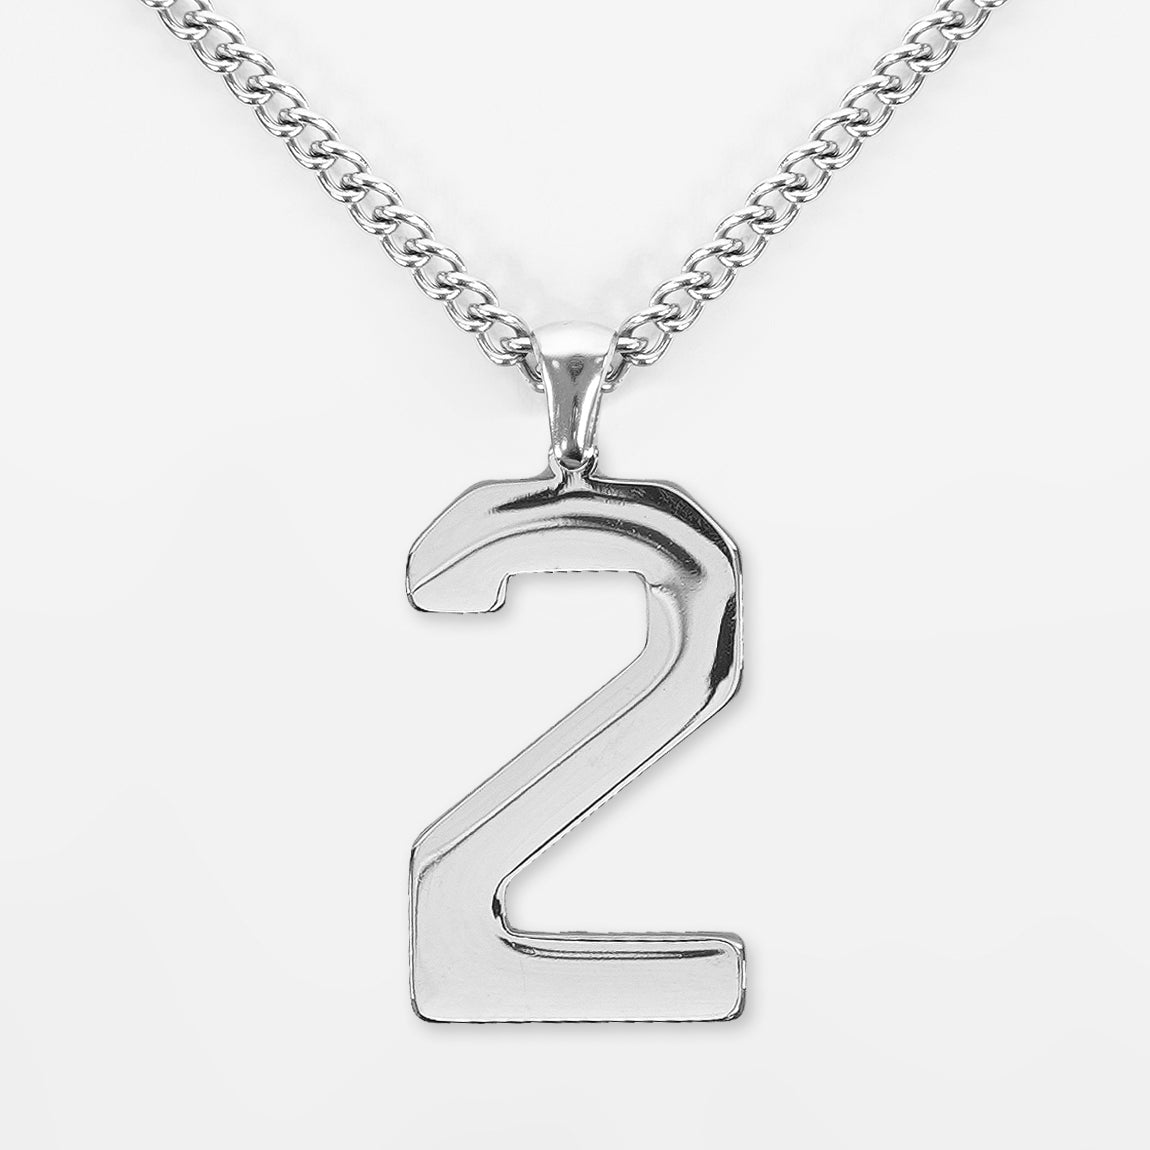 2 Number Pendant with Chain Kids Necklace - Stainless Steel